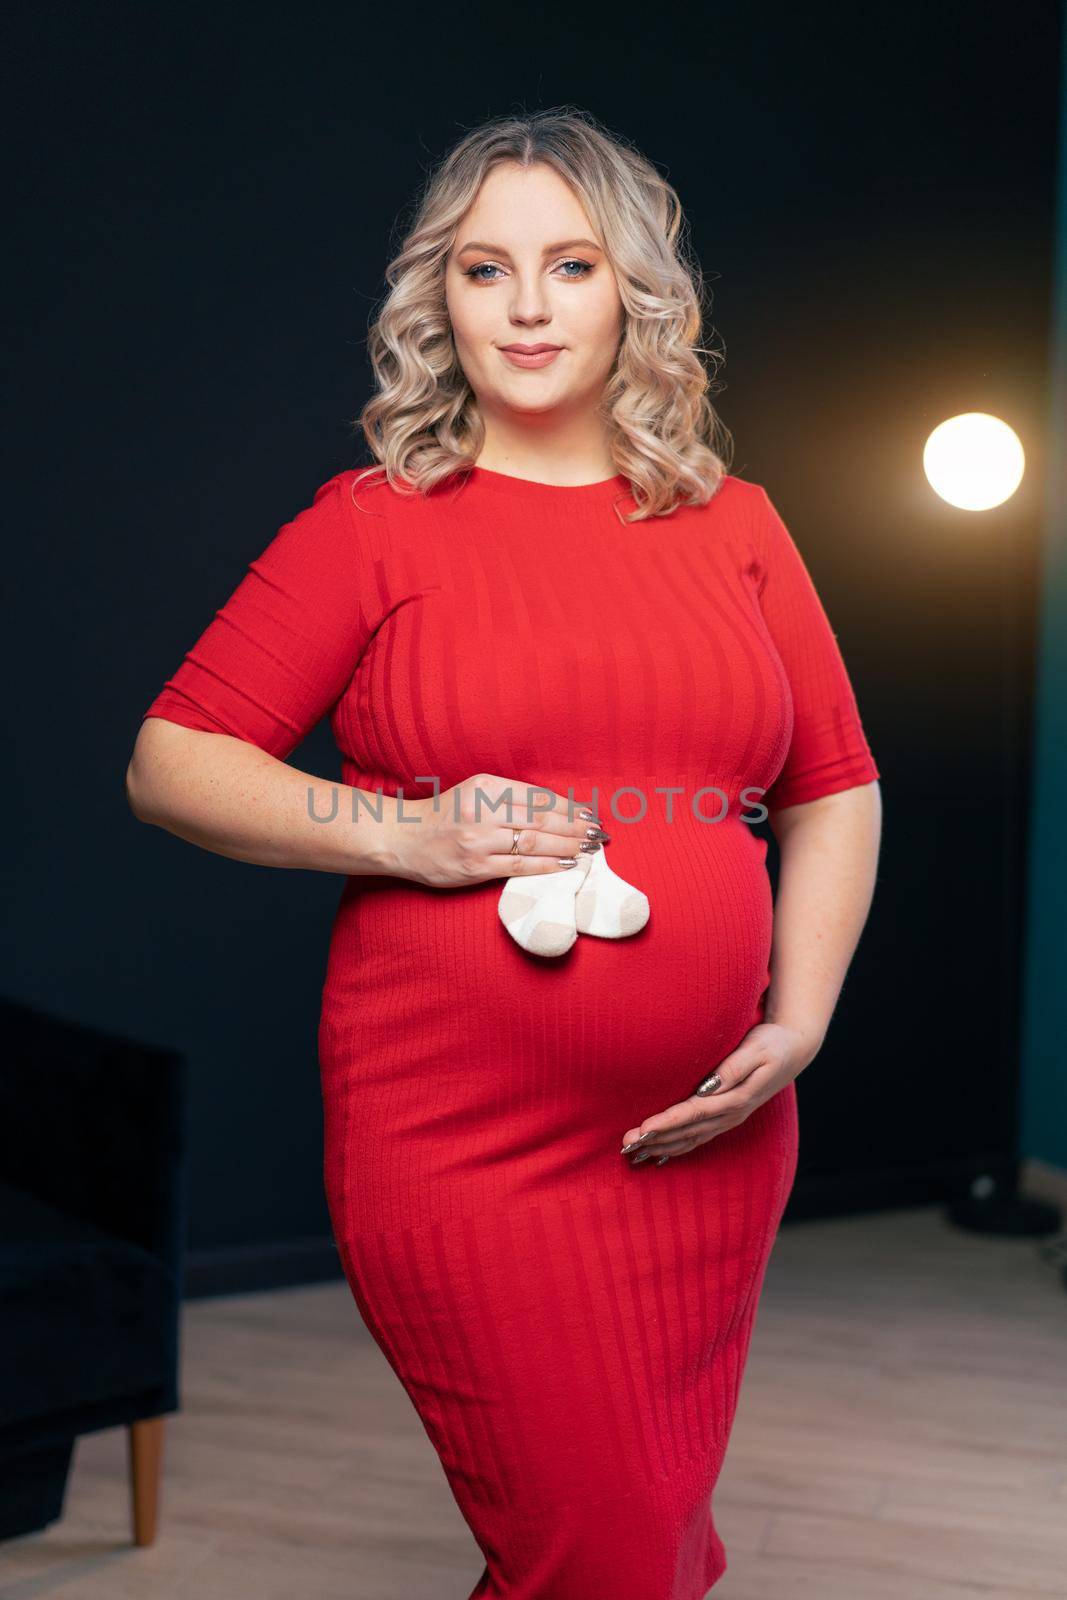 Pregnant Woman Posing In An Elegant red Dress indoors studio black wall background Blonde caucasian middle age female six month pregnancy